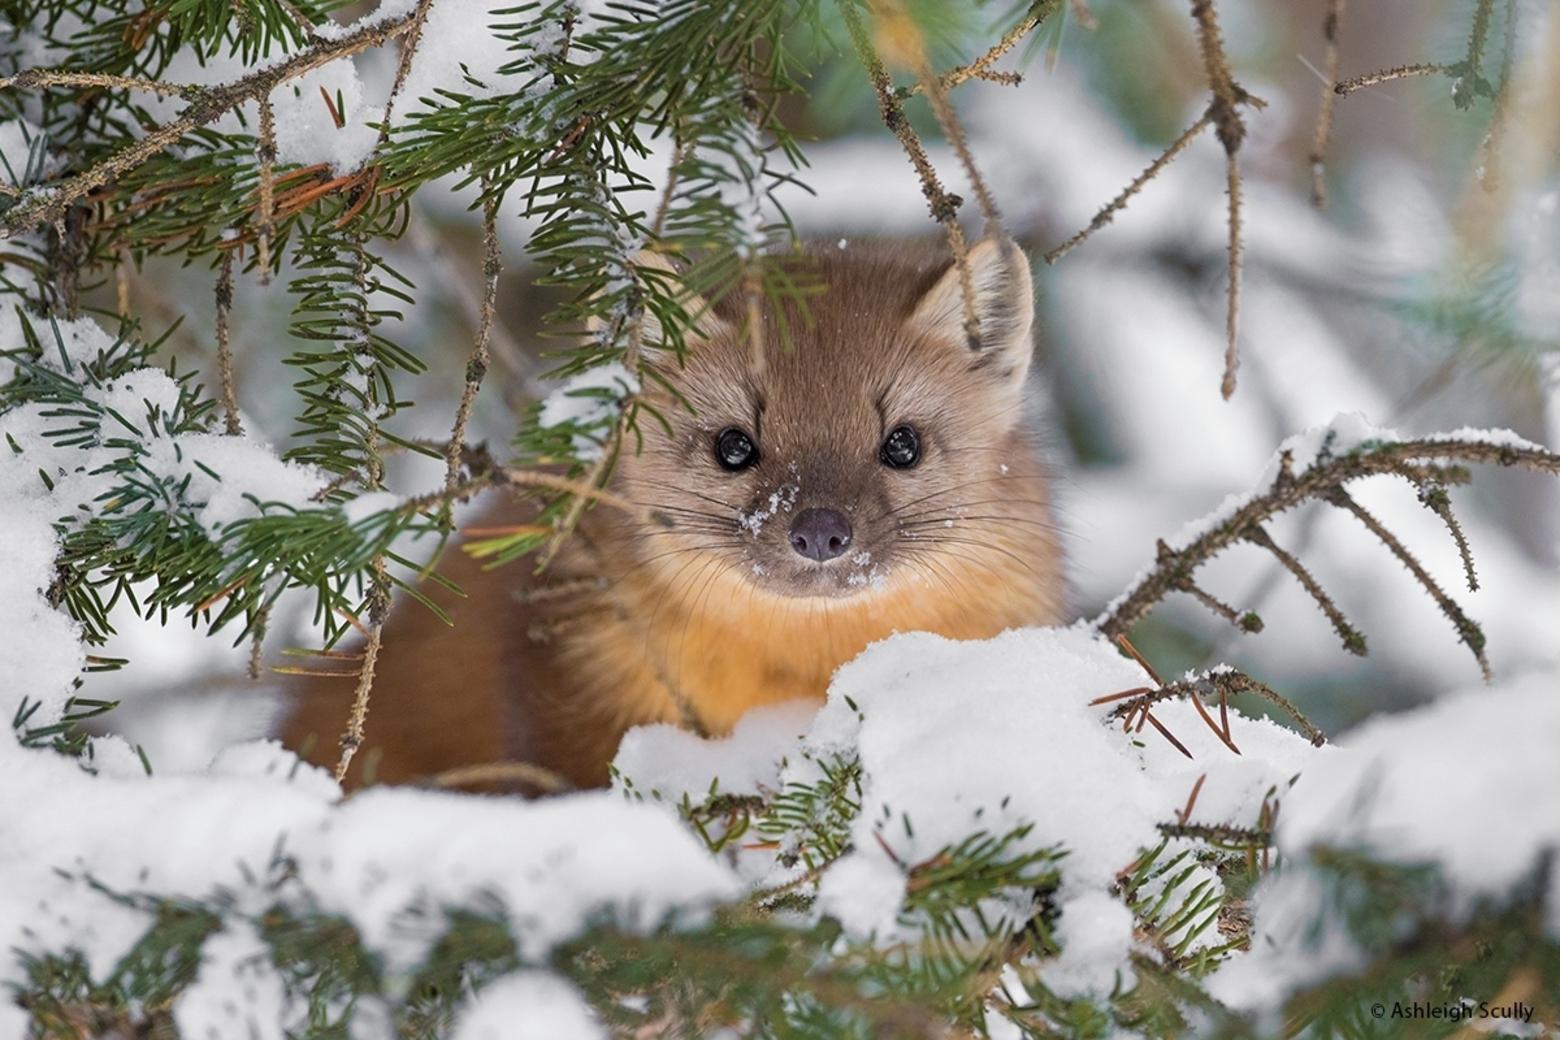 The chance to create this image, &quot;Pine Marten,&quot; presented itself quite unexpectedly. &quot;Last winter over the course of a few days, my family had a surprise visit from an American Marten at our home in Jackson Hole,&quot; Scully says. &quot;The marten was extremely curious, and enjoyed running around the yard from cottonwood to cottonwood, sweeping off the snow drifts from the bark, searching for cavities where a tasty red squirrel snack might be hiding. Each morning I had my camera and lens ready on a window sill and we each peeked out of the kitchen windows, hoping the marten would make an appearance. At one point, it climbed into a spruce tree by our back desk and laid flat in the crook of a tree branch and closed its eyes for a nap. I quietly went outside in pajamas and boots and took some photos of it resting. This image was taken as it lifted its head to inspect me, as if I was the strange one to be seen that day! This remains one of my favorite wildlife encounters and experiences in Jackson Hole.&quot;